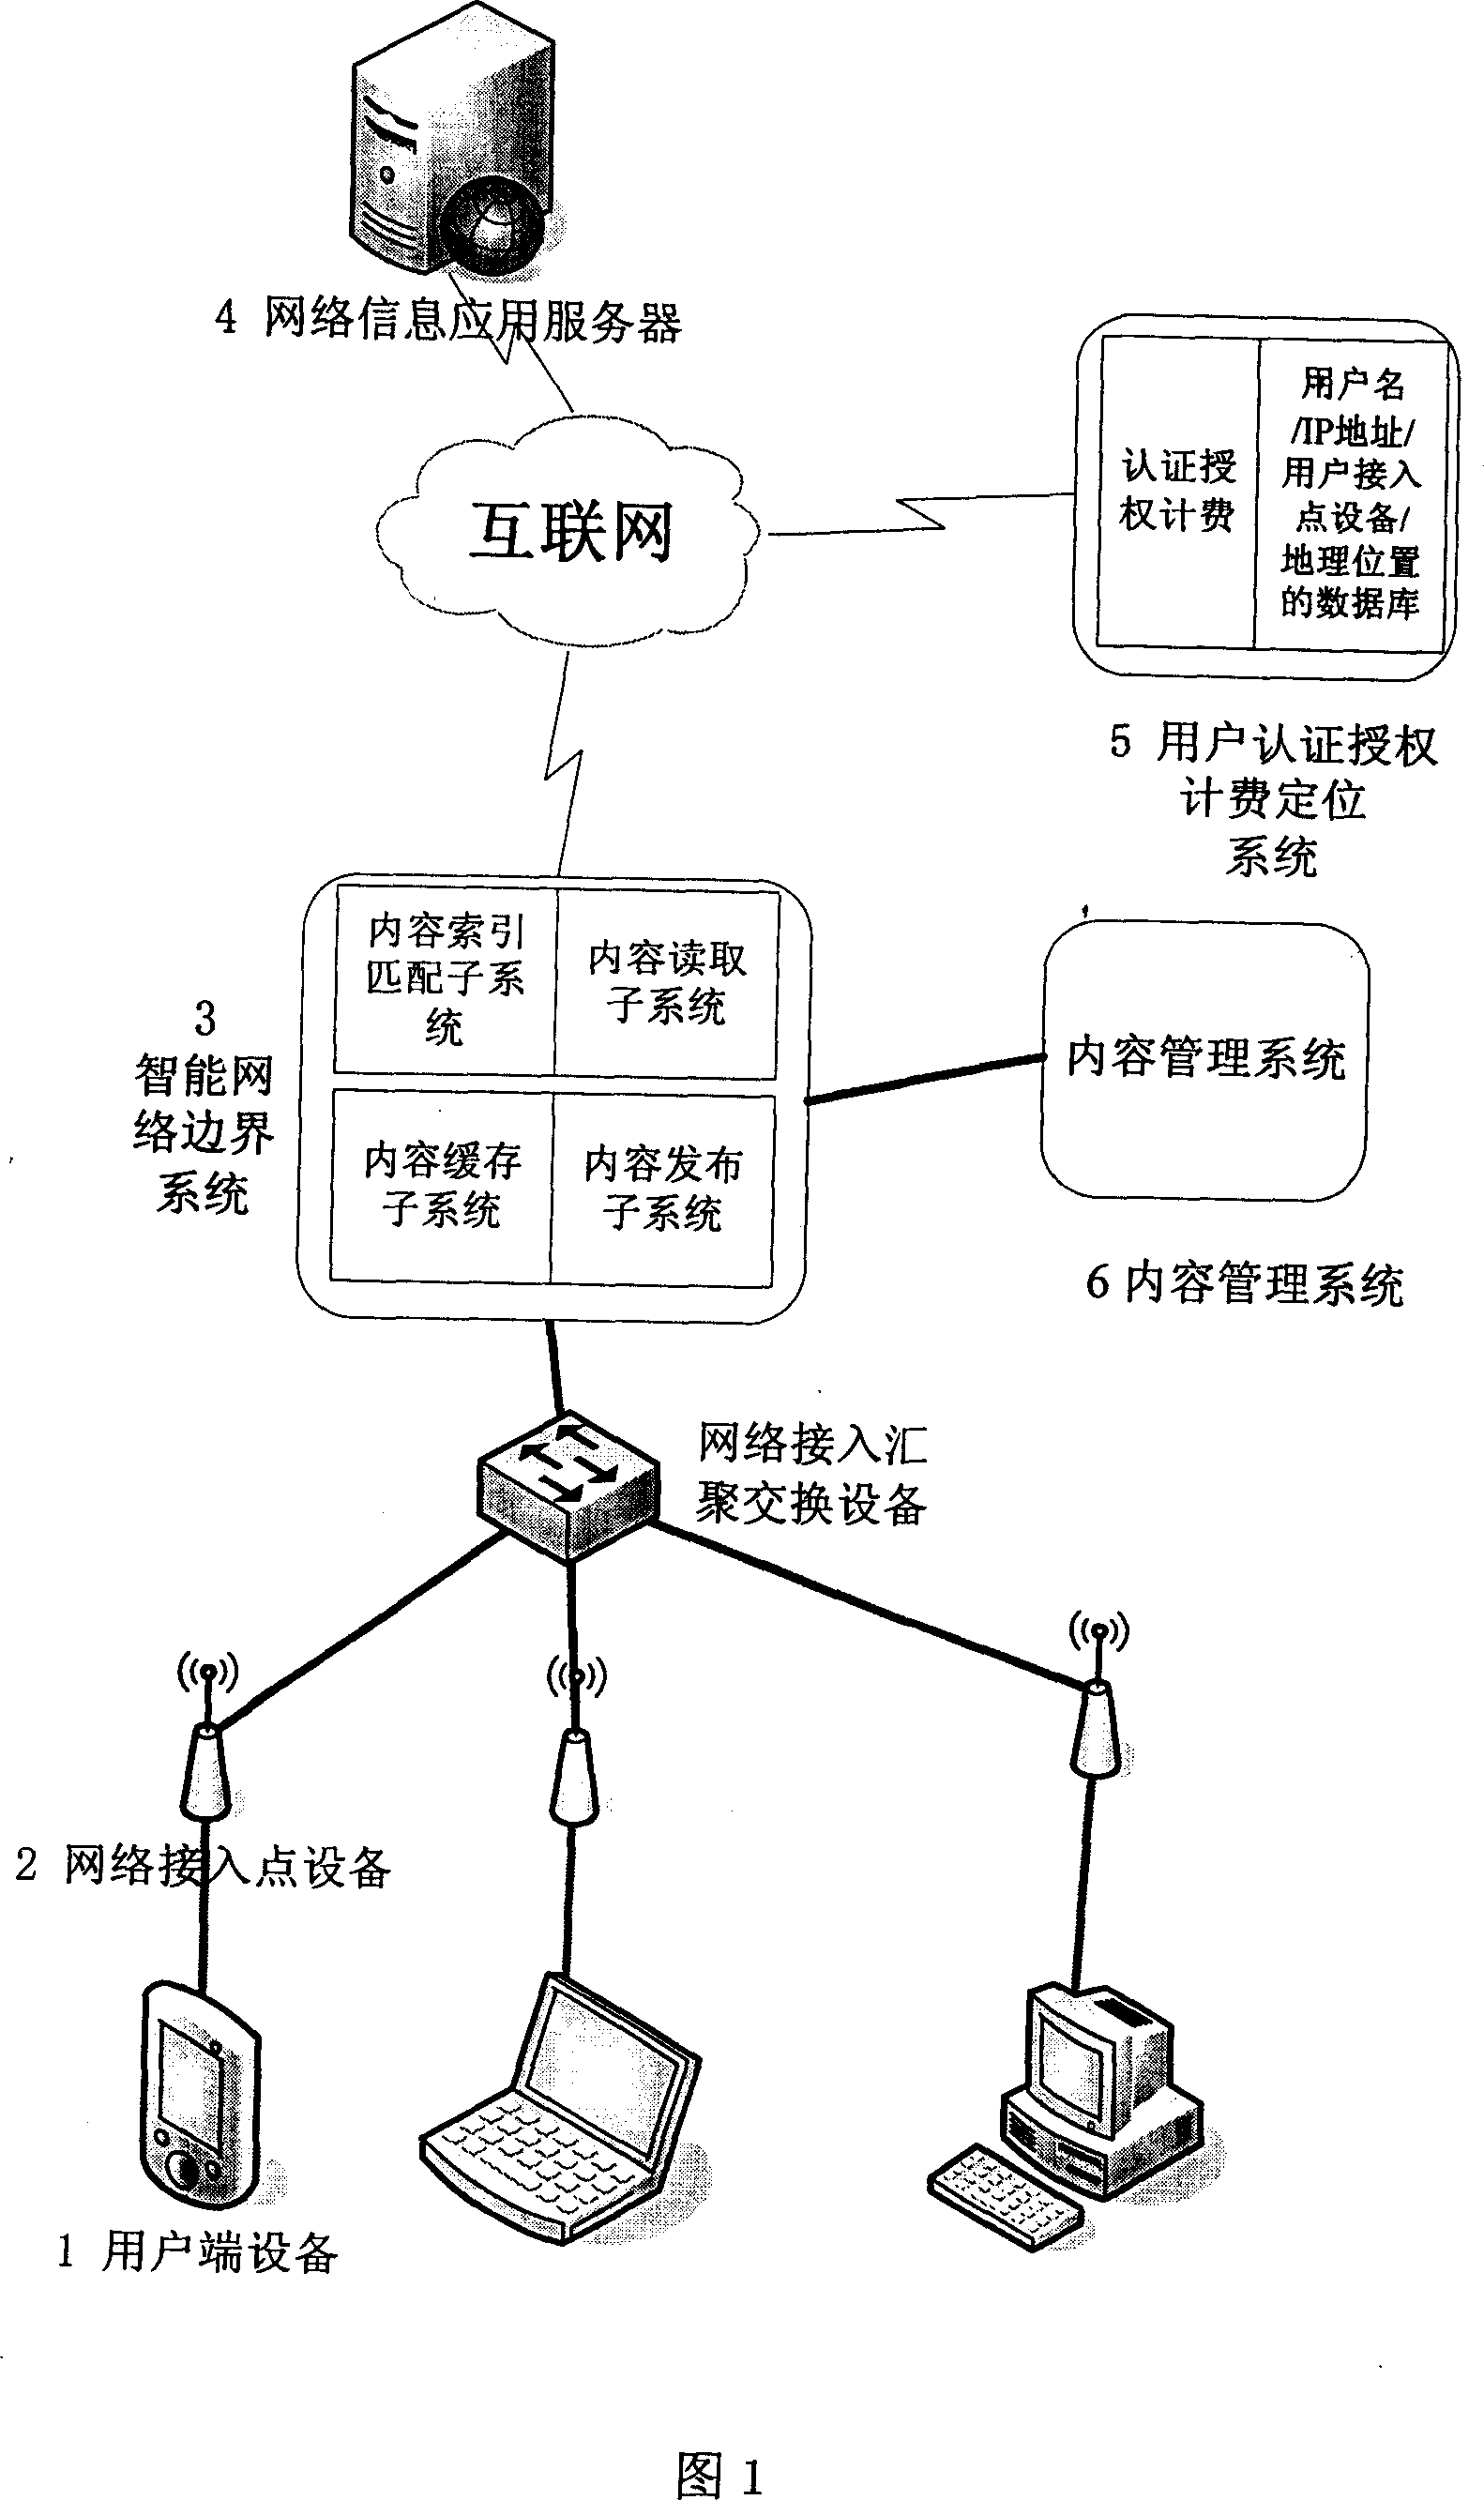 A system and method for oriented and customized distribution of the network contents